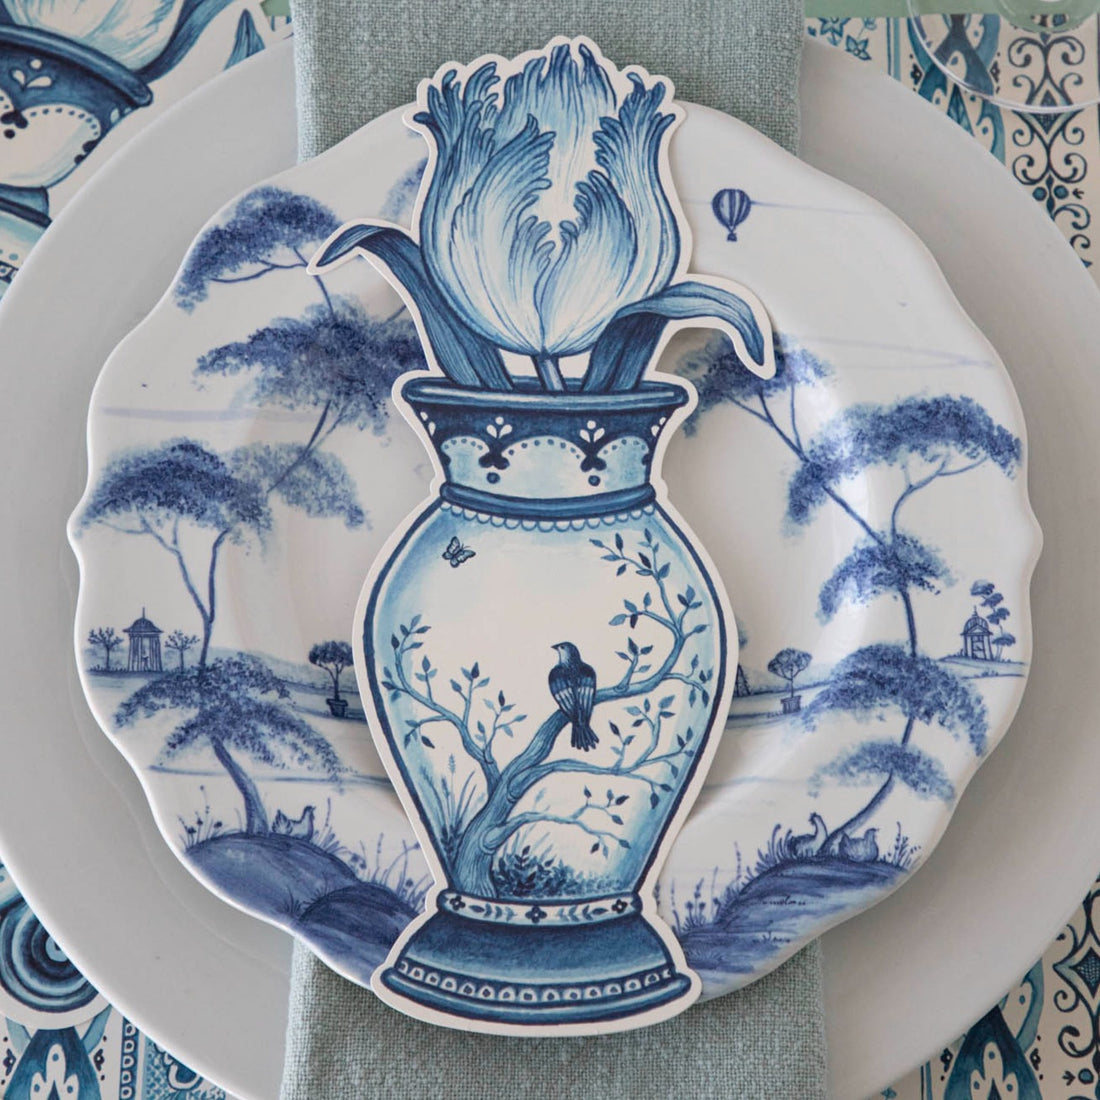 A versatile Indigo Tulip Table Accent by Hester &amp; Cook, this blue and white plate with a bird on it adds a decorative touch to any space.